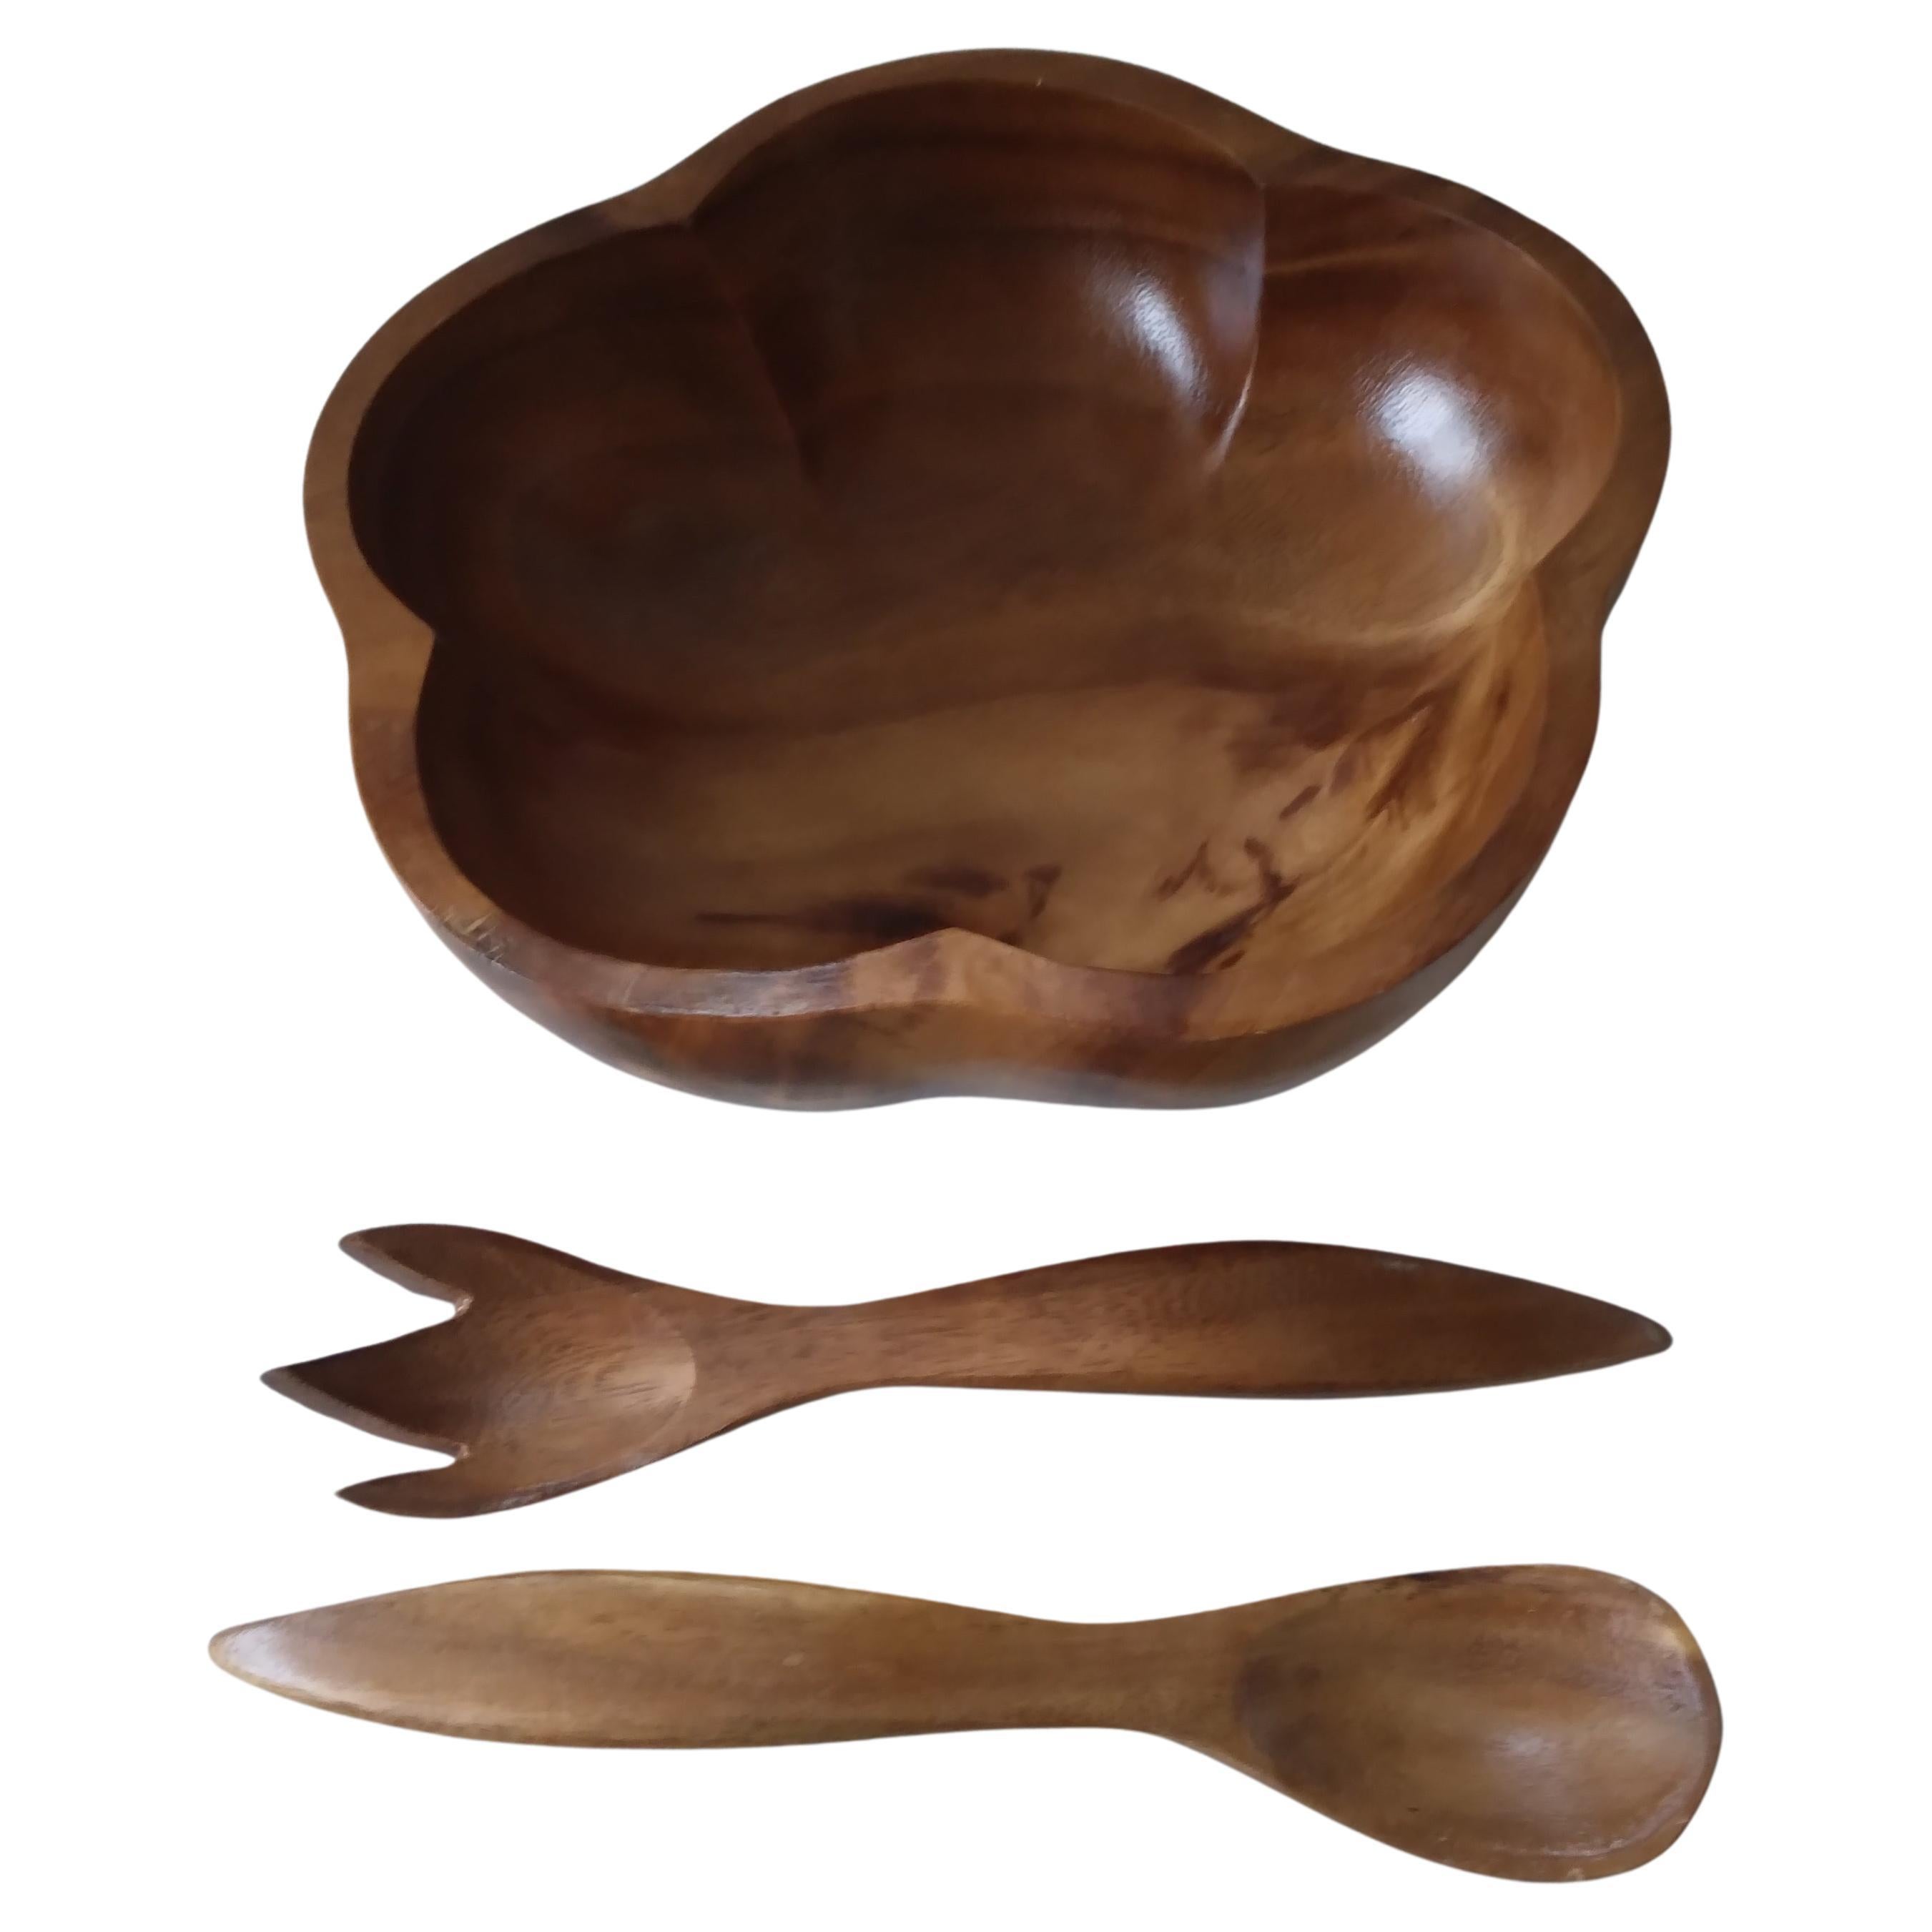 Wooden Flower Shaped Salad Bowl with Servers